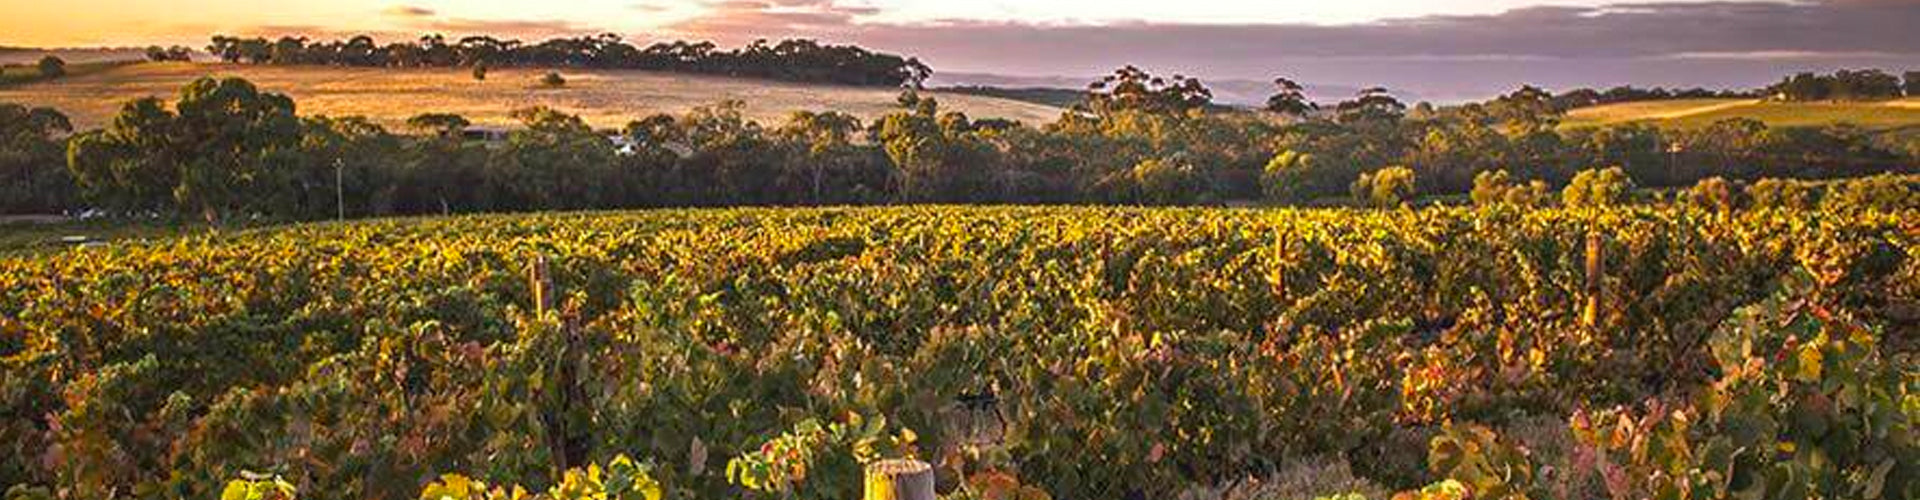 S.C. Pannell Vineyards in the McLaren Vale, South Australia